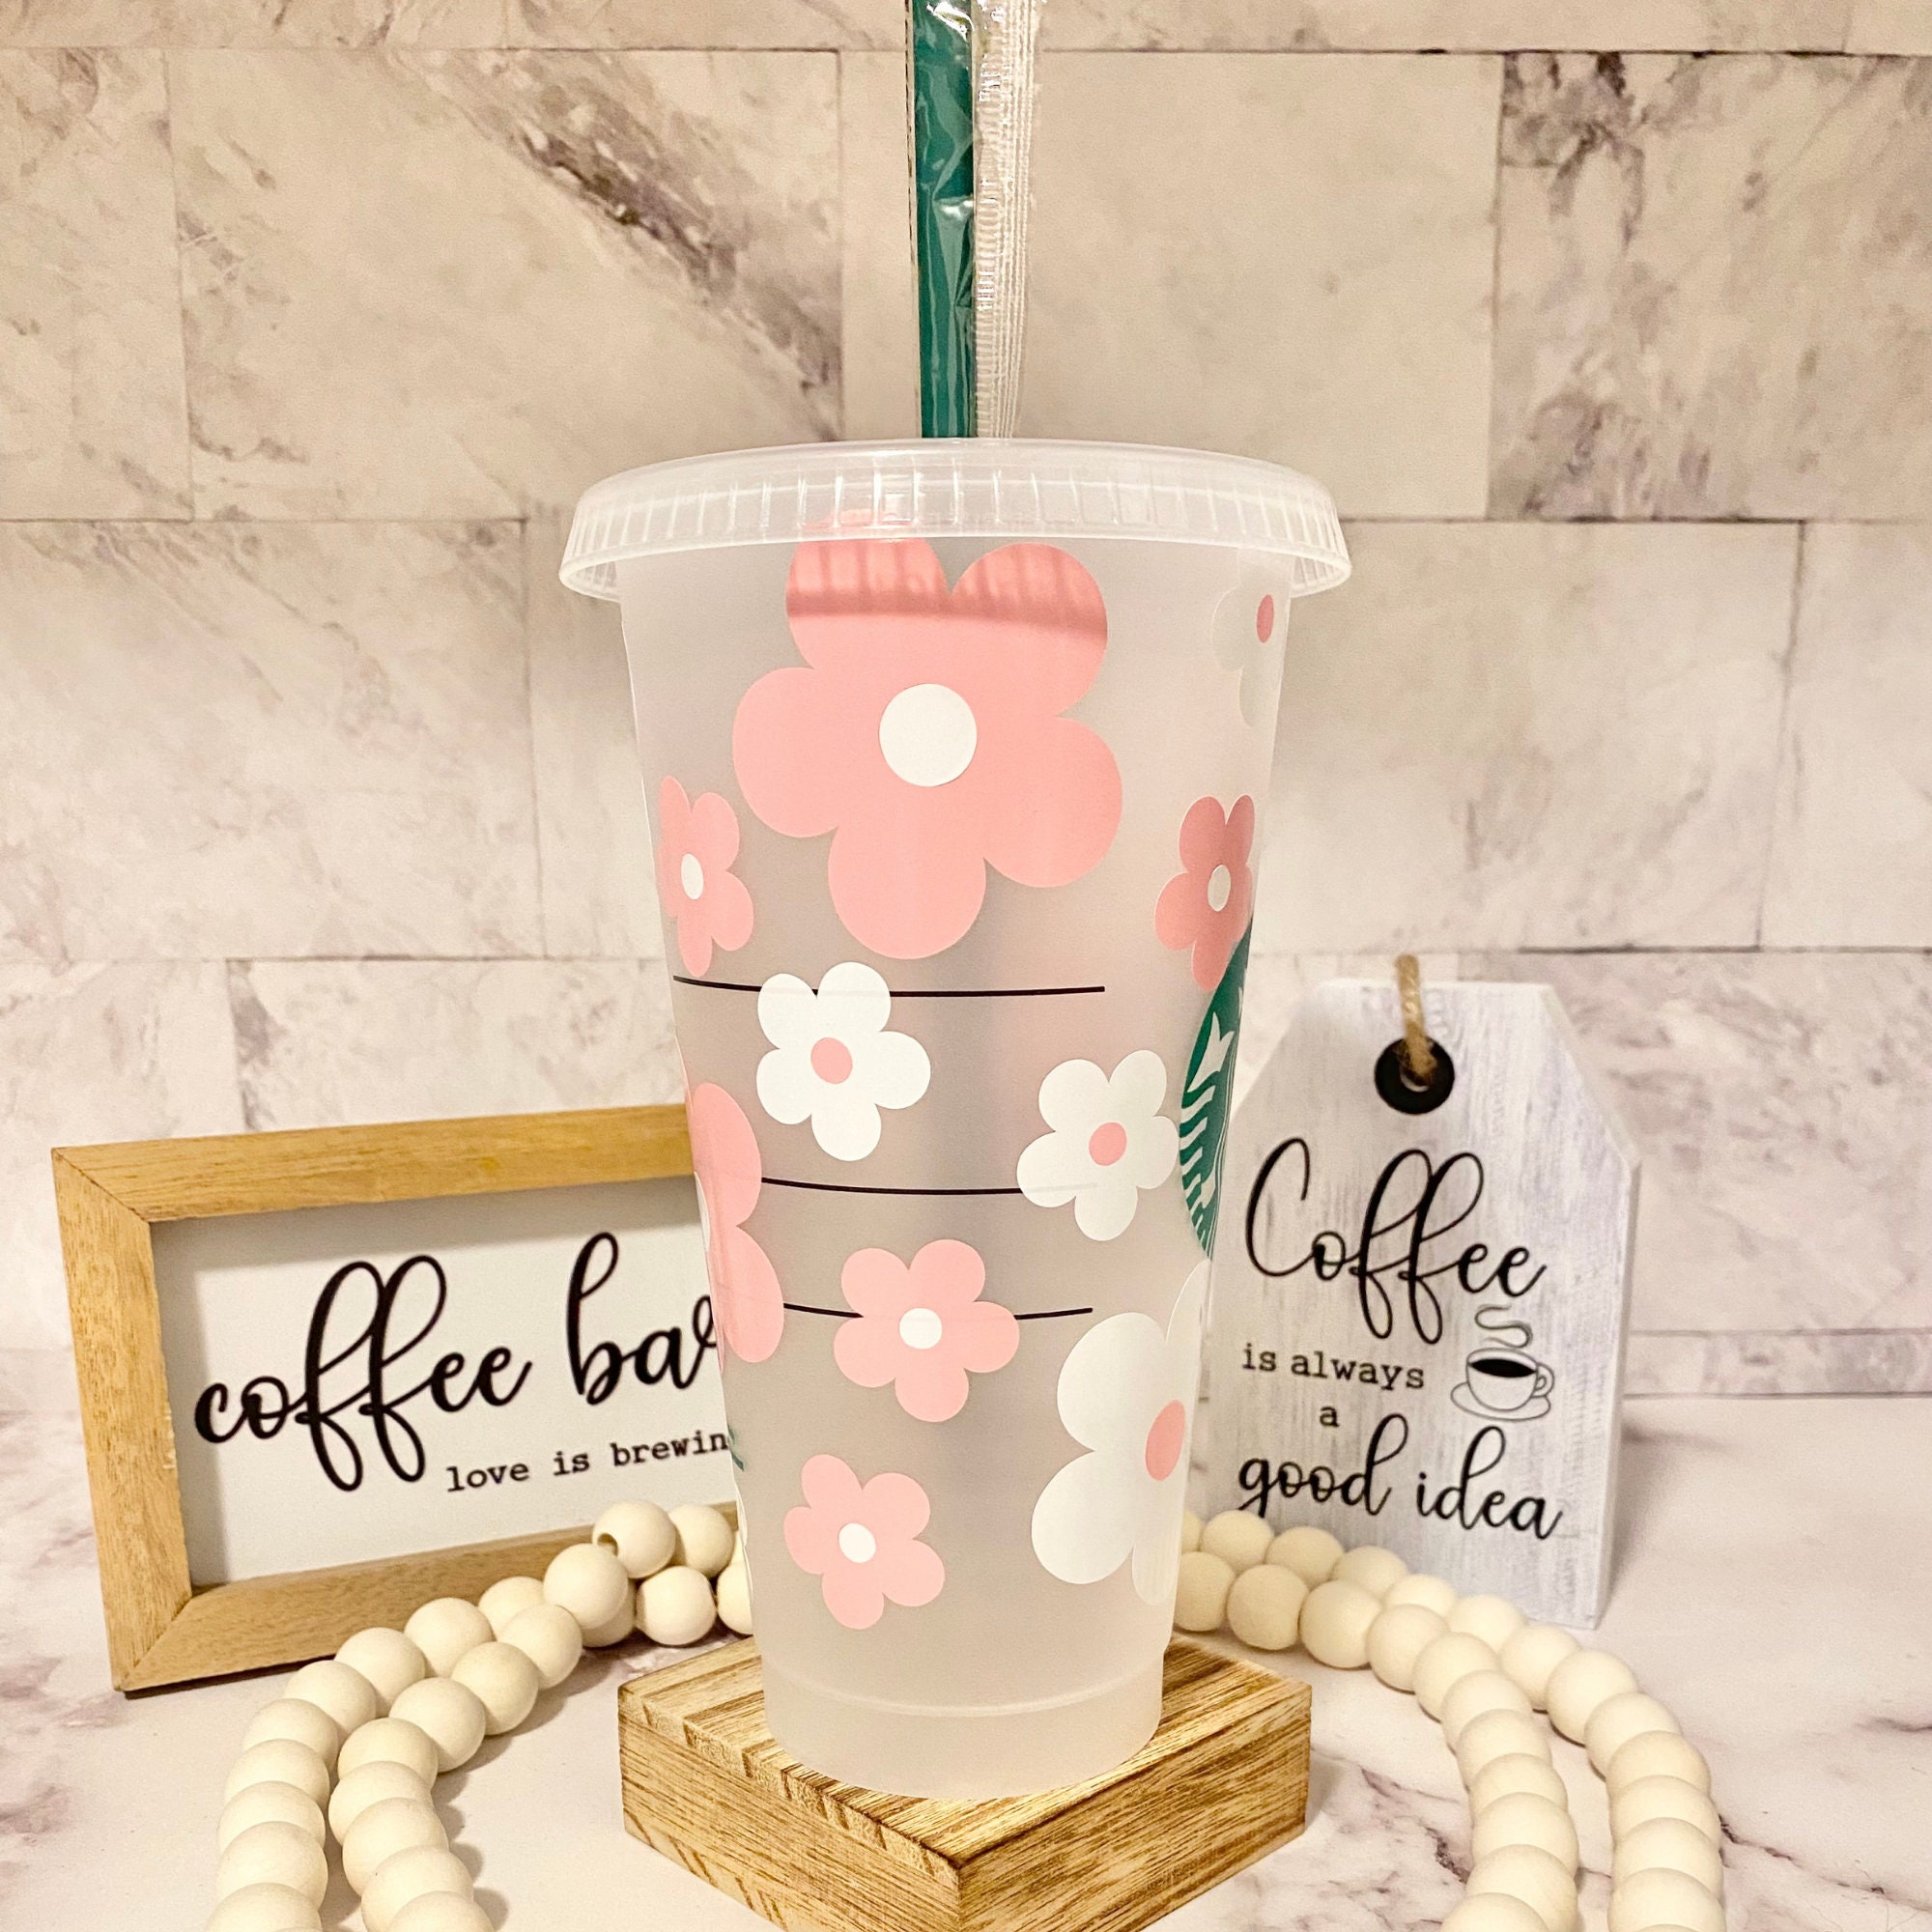 Patterned Personalized Starbucks reusable cold cup – MyMermaidGirls